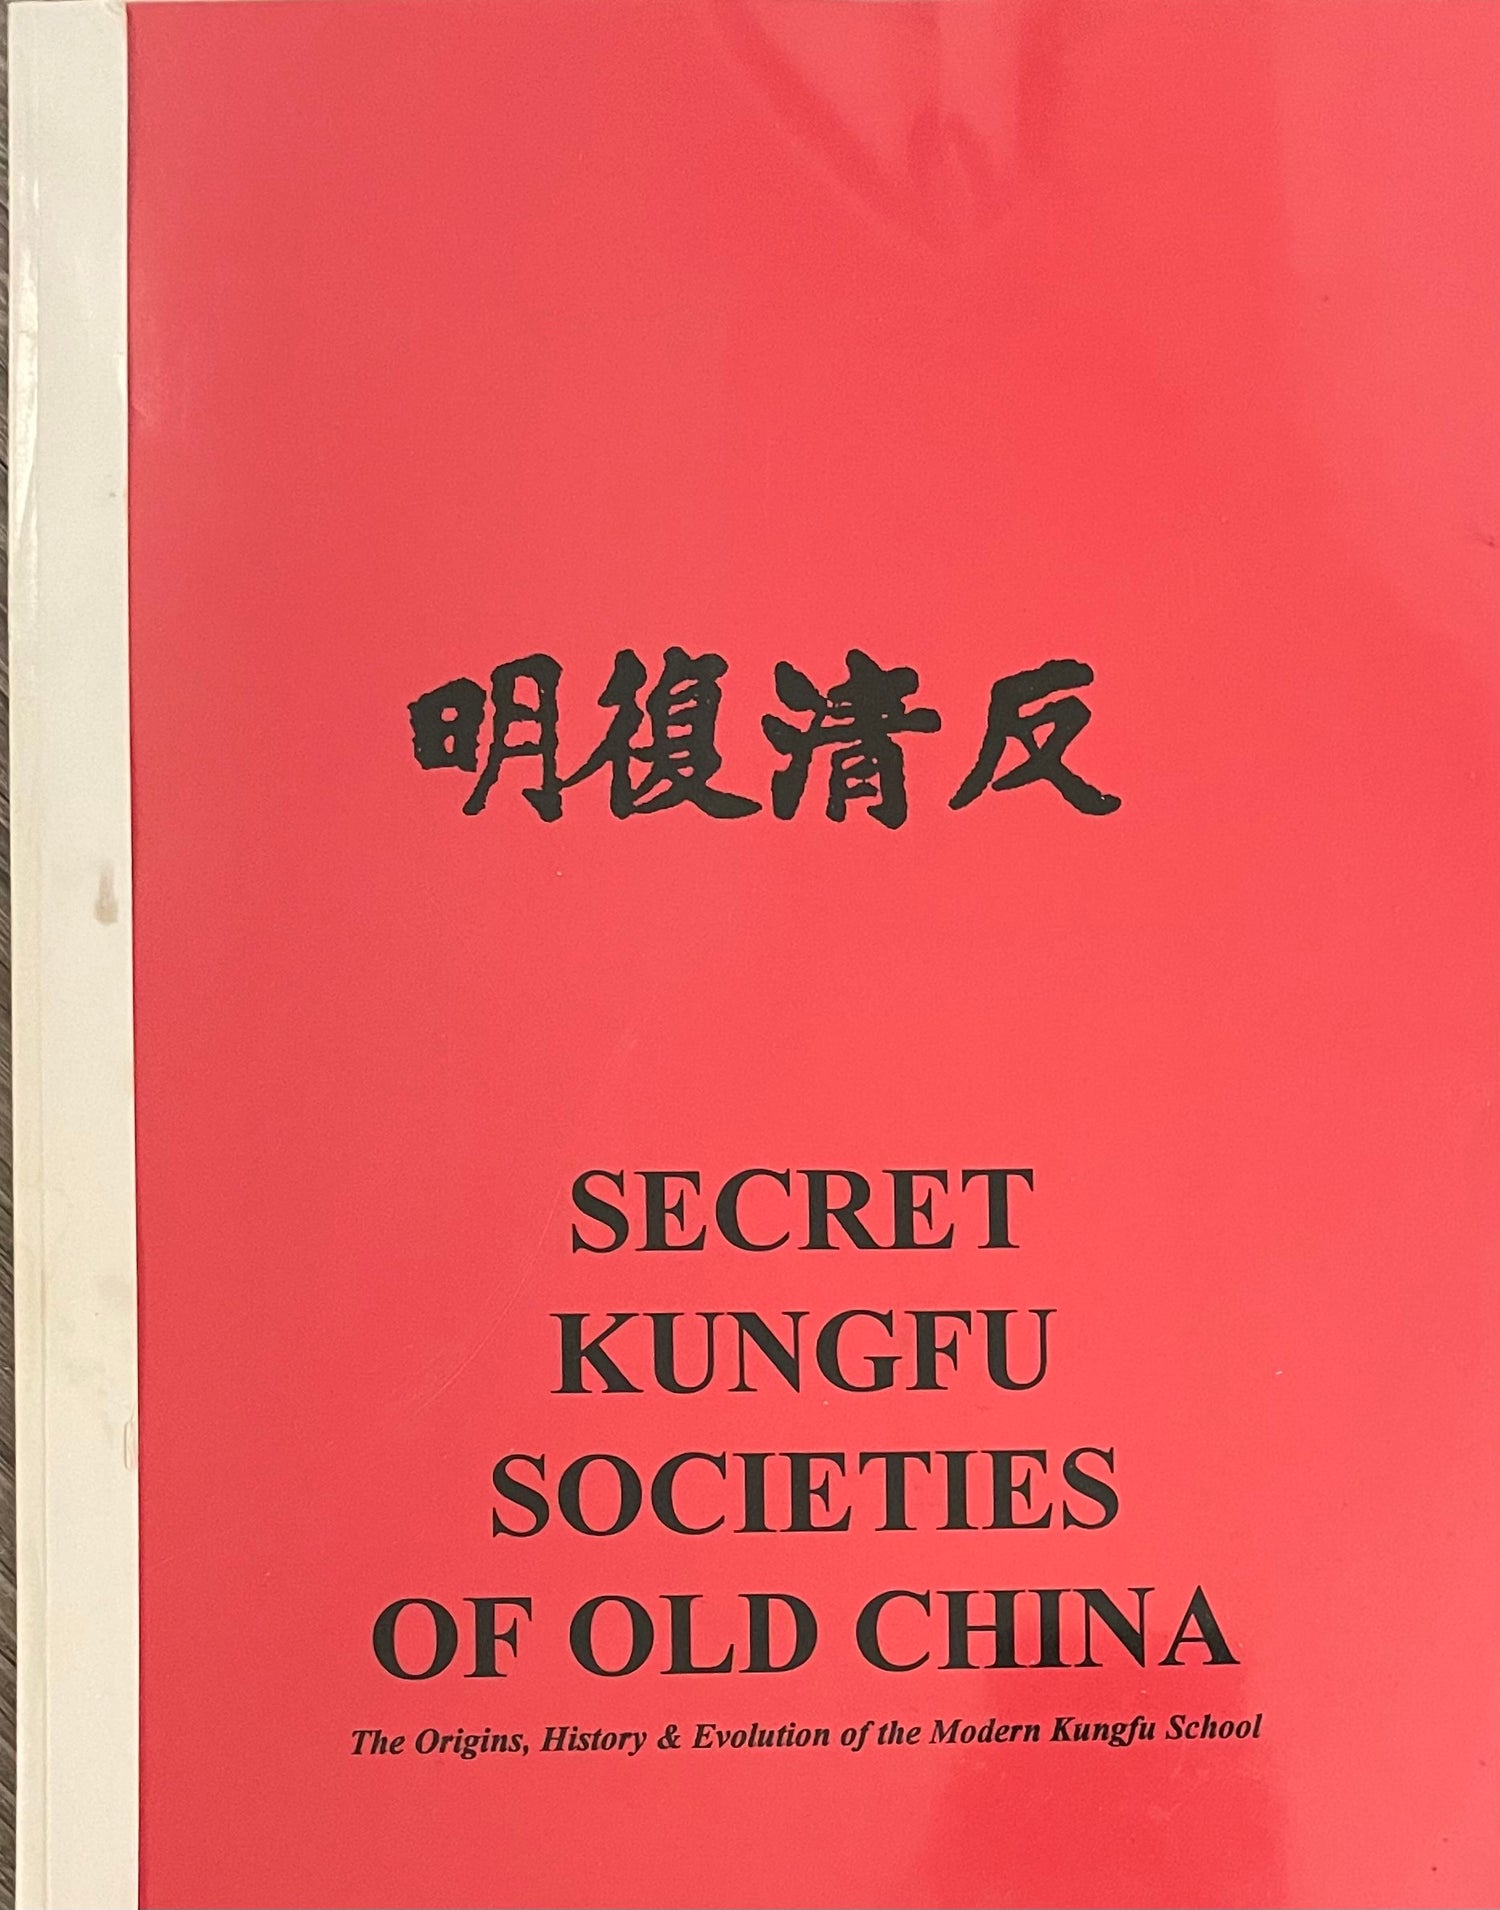 Secret Kung Fu Societies of Old China Book by Roger Hagood (Preowned) - Budovideos Inc